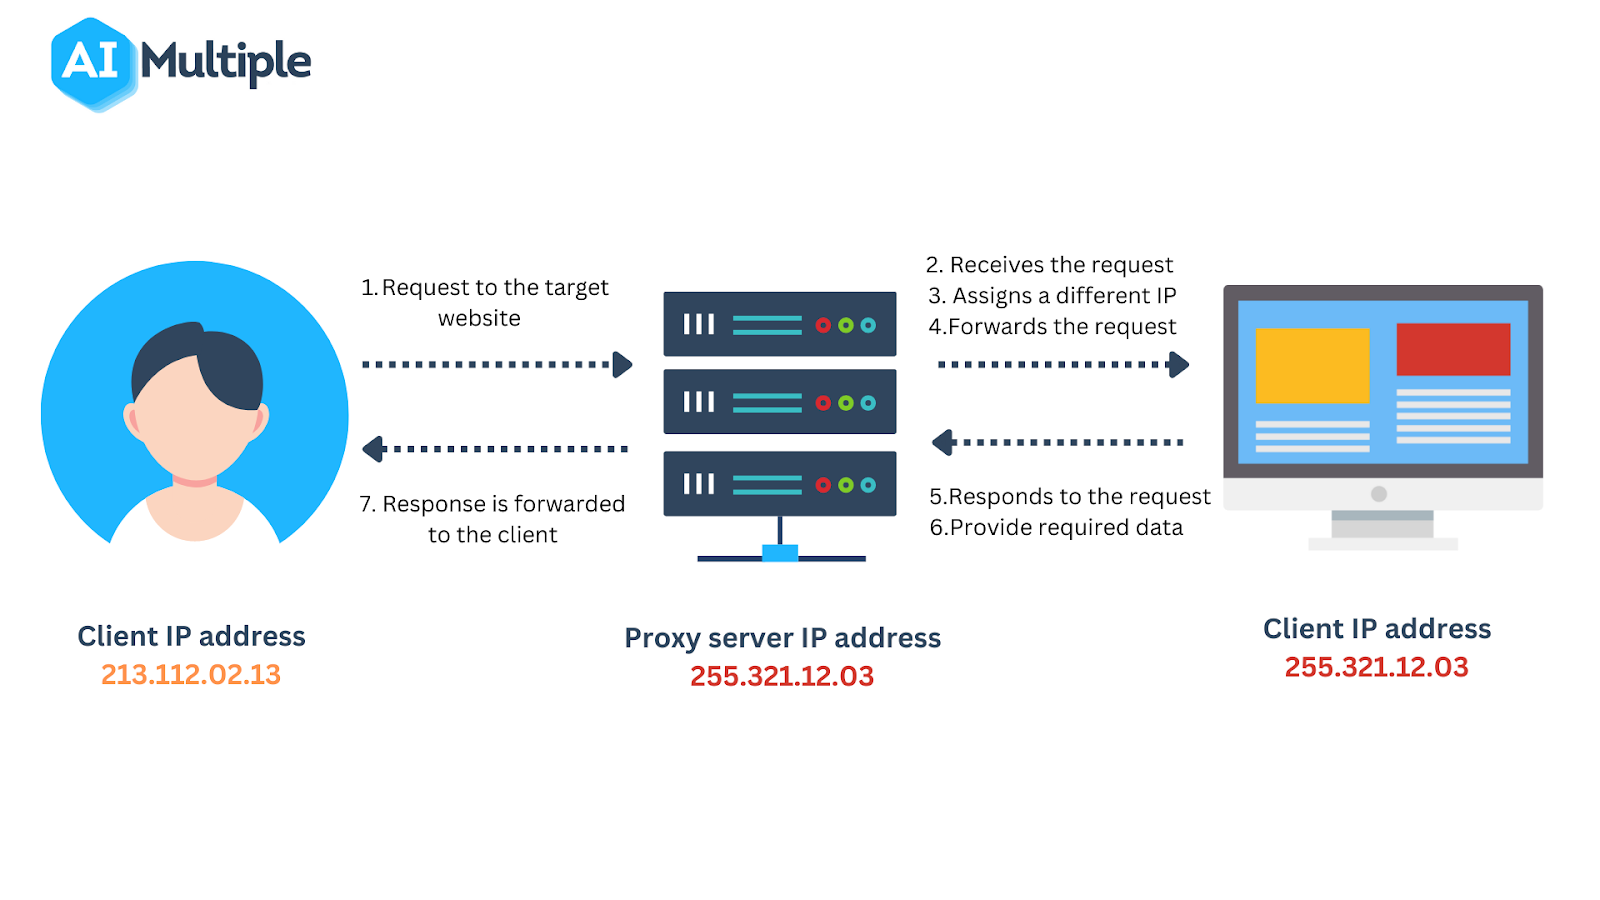 Proxy servers retrieve data from web sources on behalf of users.  The image shows  the process of proxy servers in six steps.